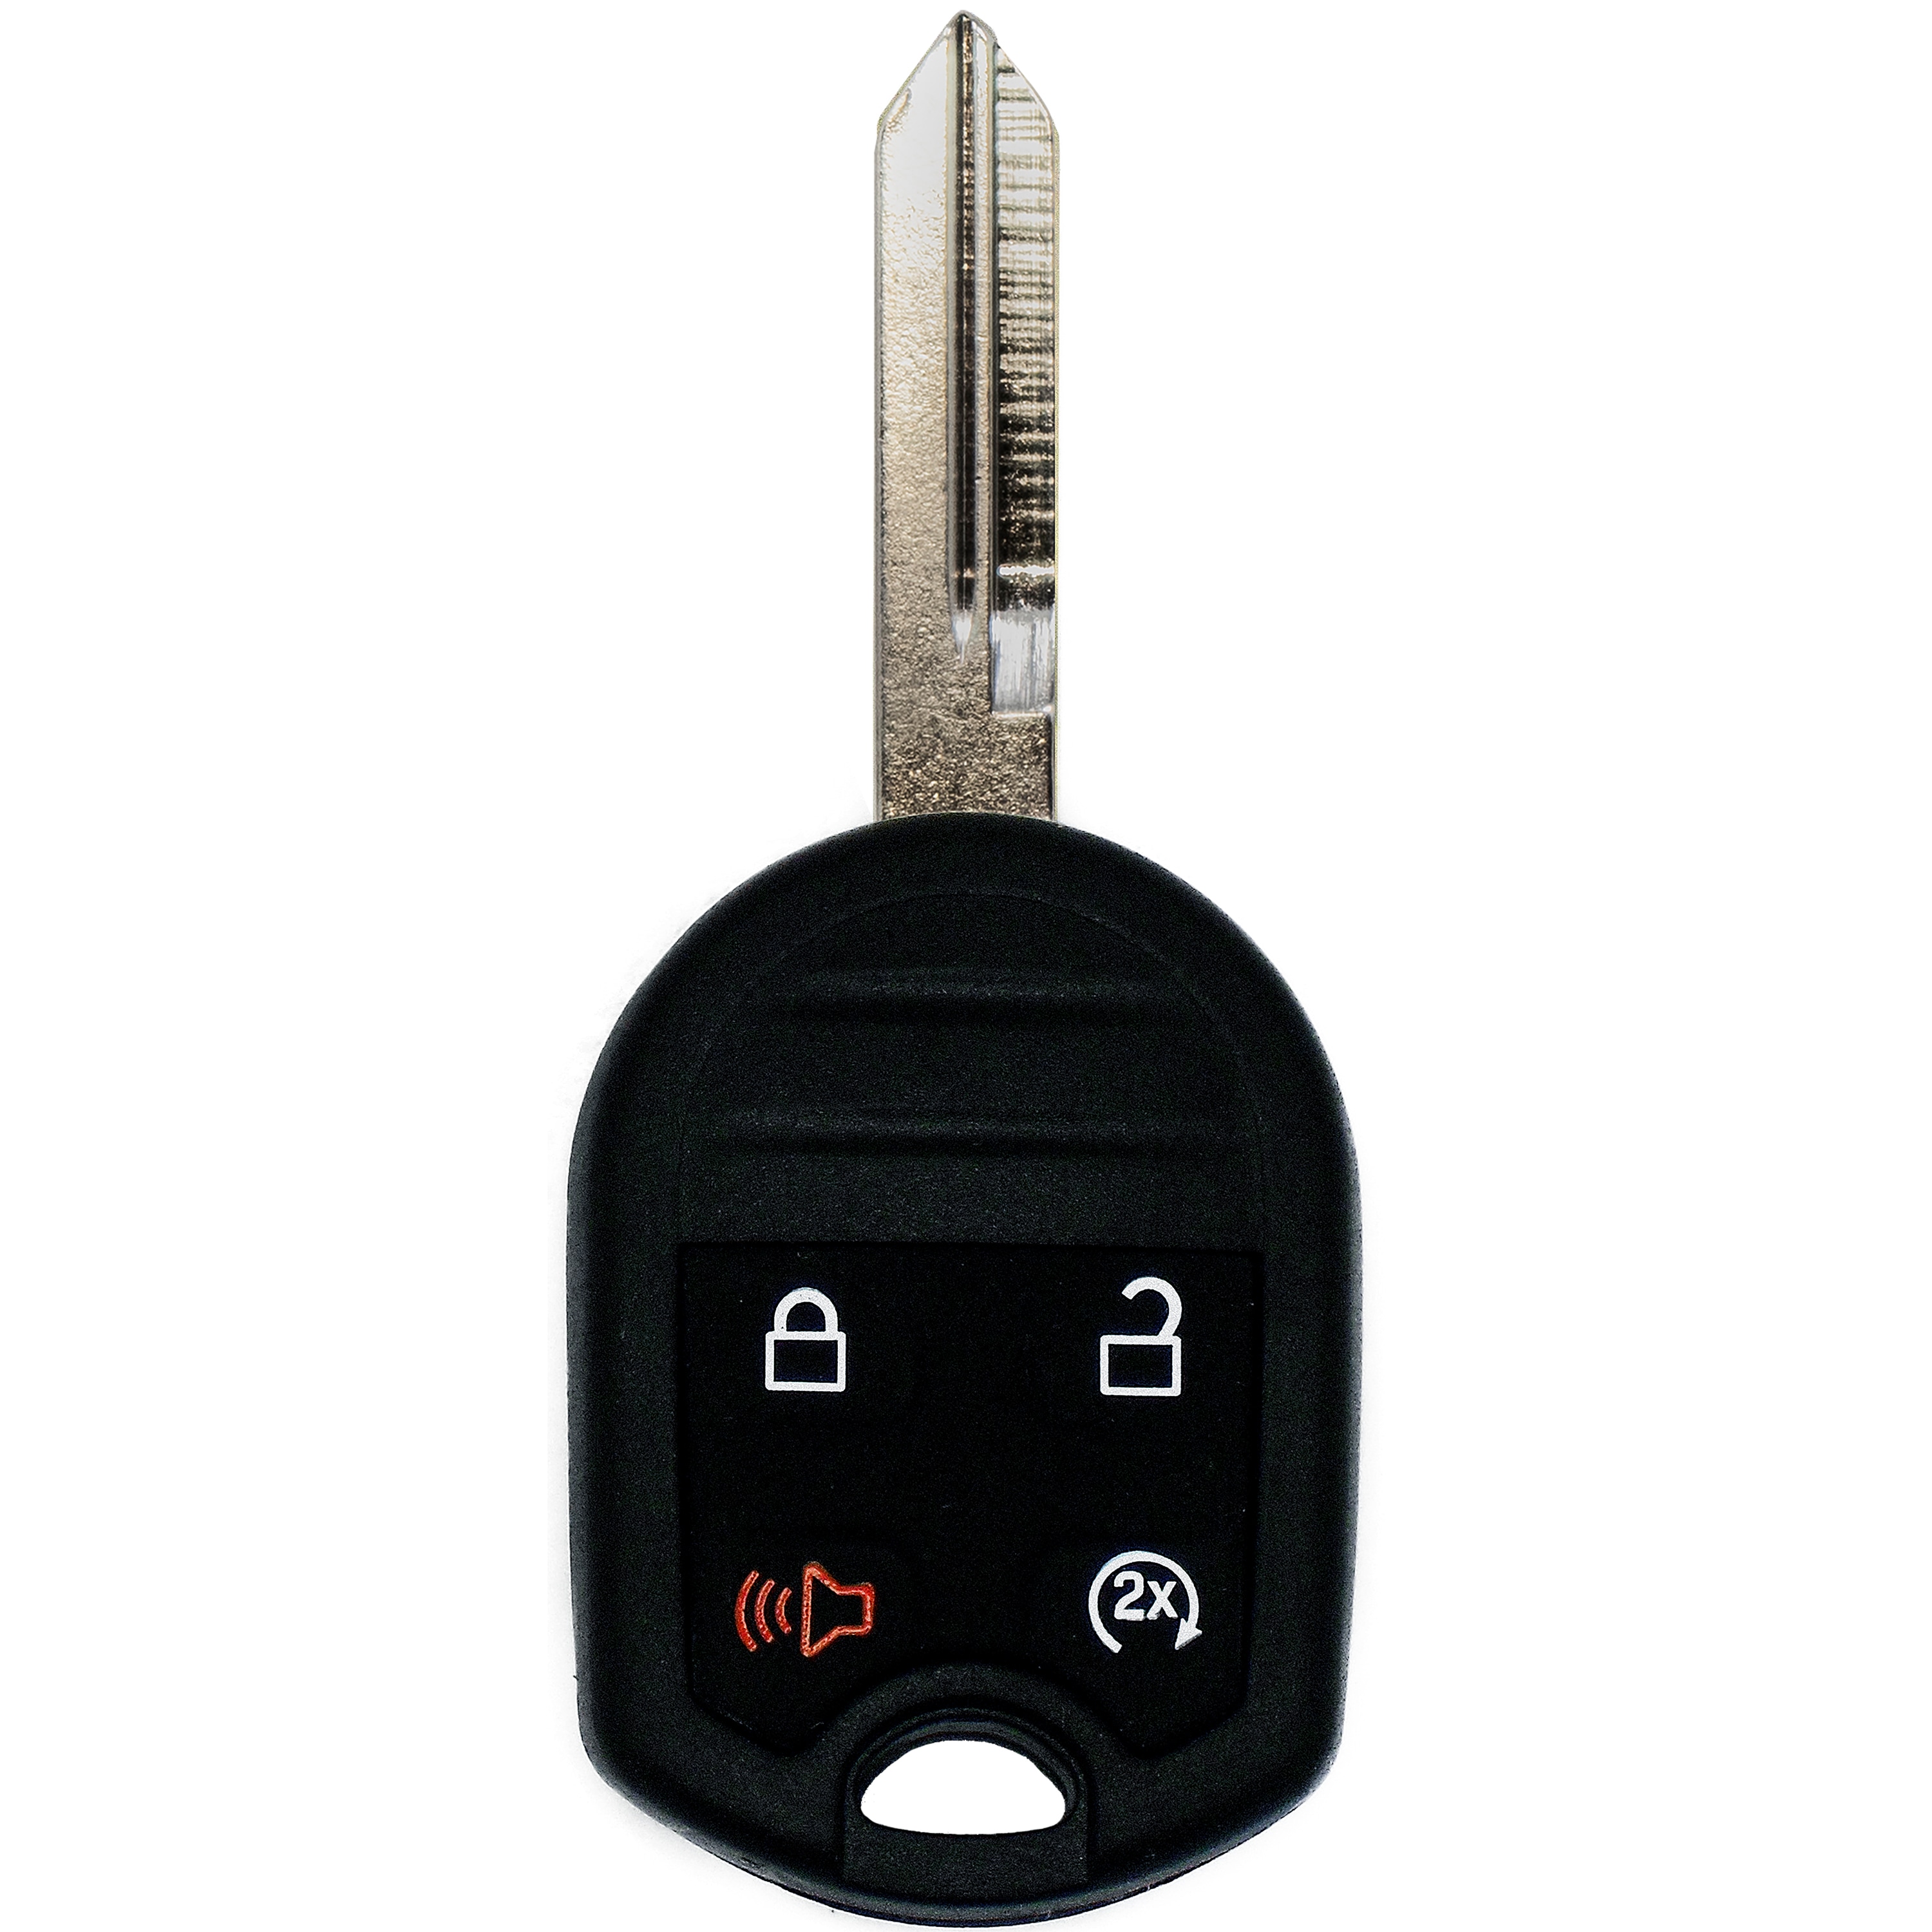 4-Button Key Fob Remote for Home Security System - Constellation Connect